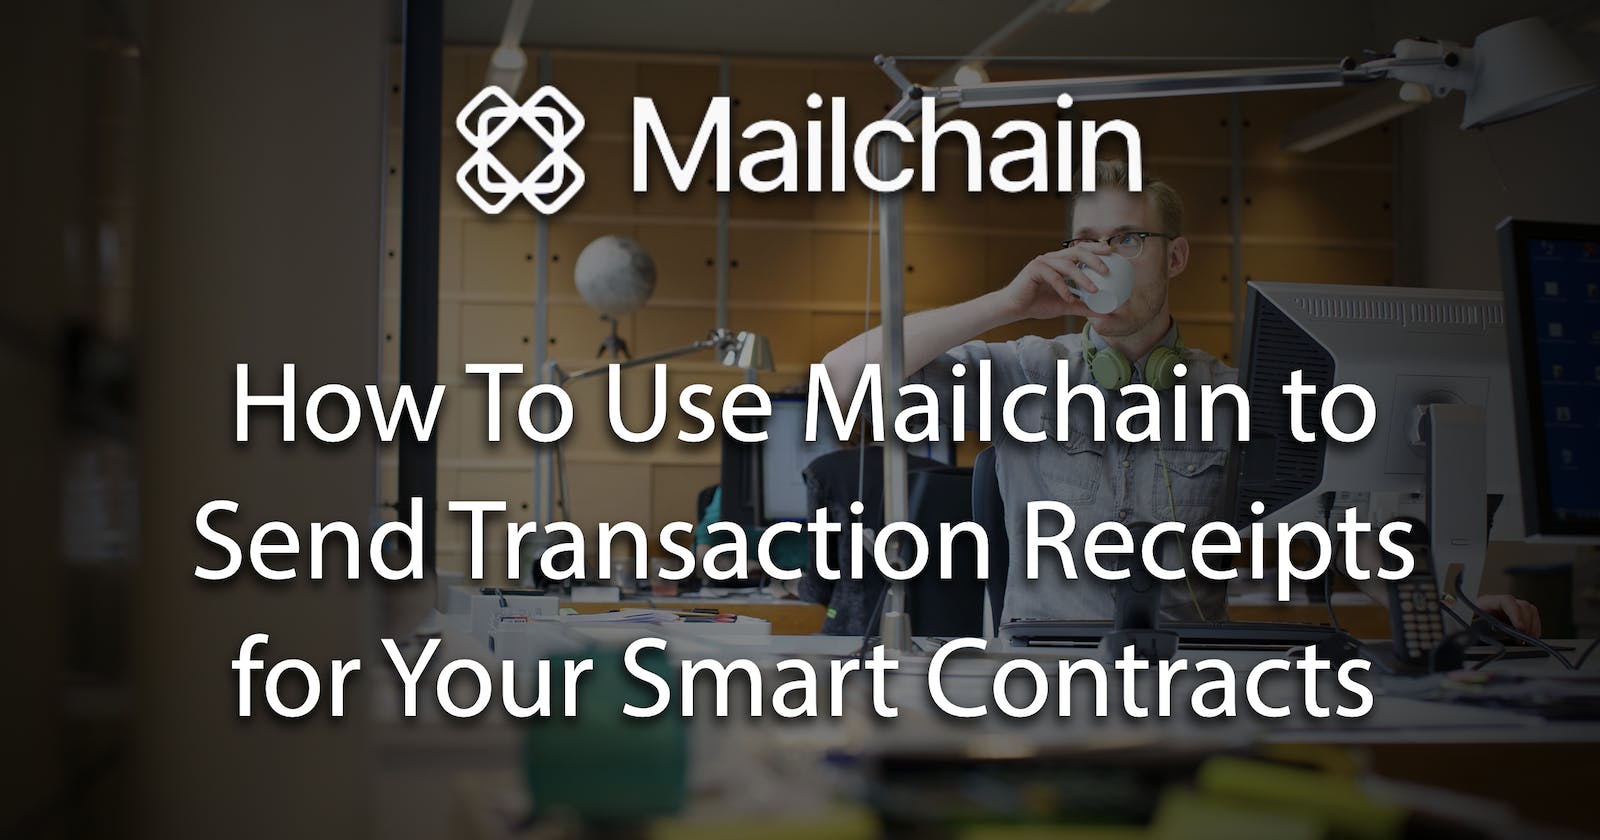 Buy Me a Coffee with Mailchain